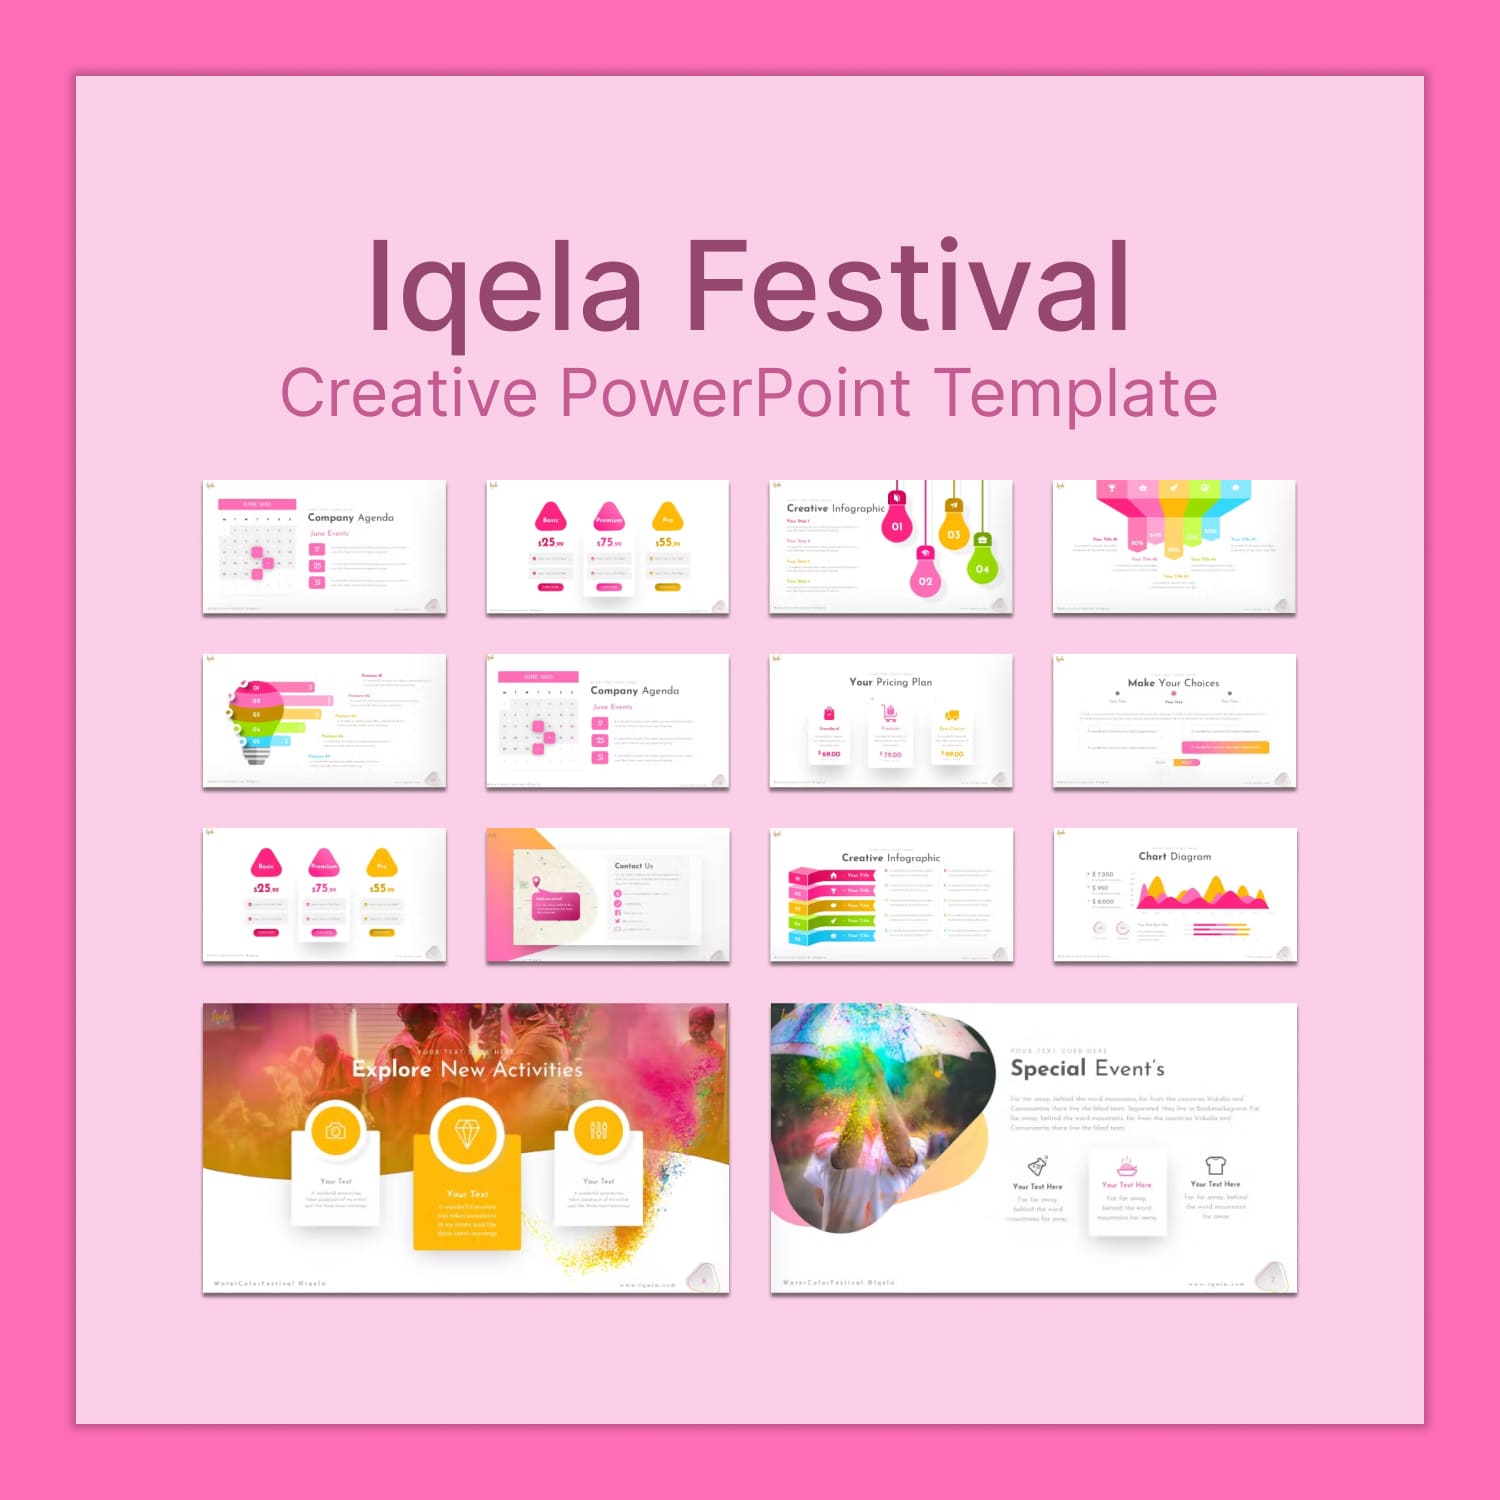 Iqela festival creative powerpoint template - main image preview.